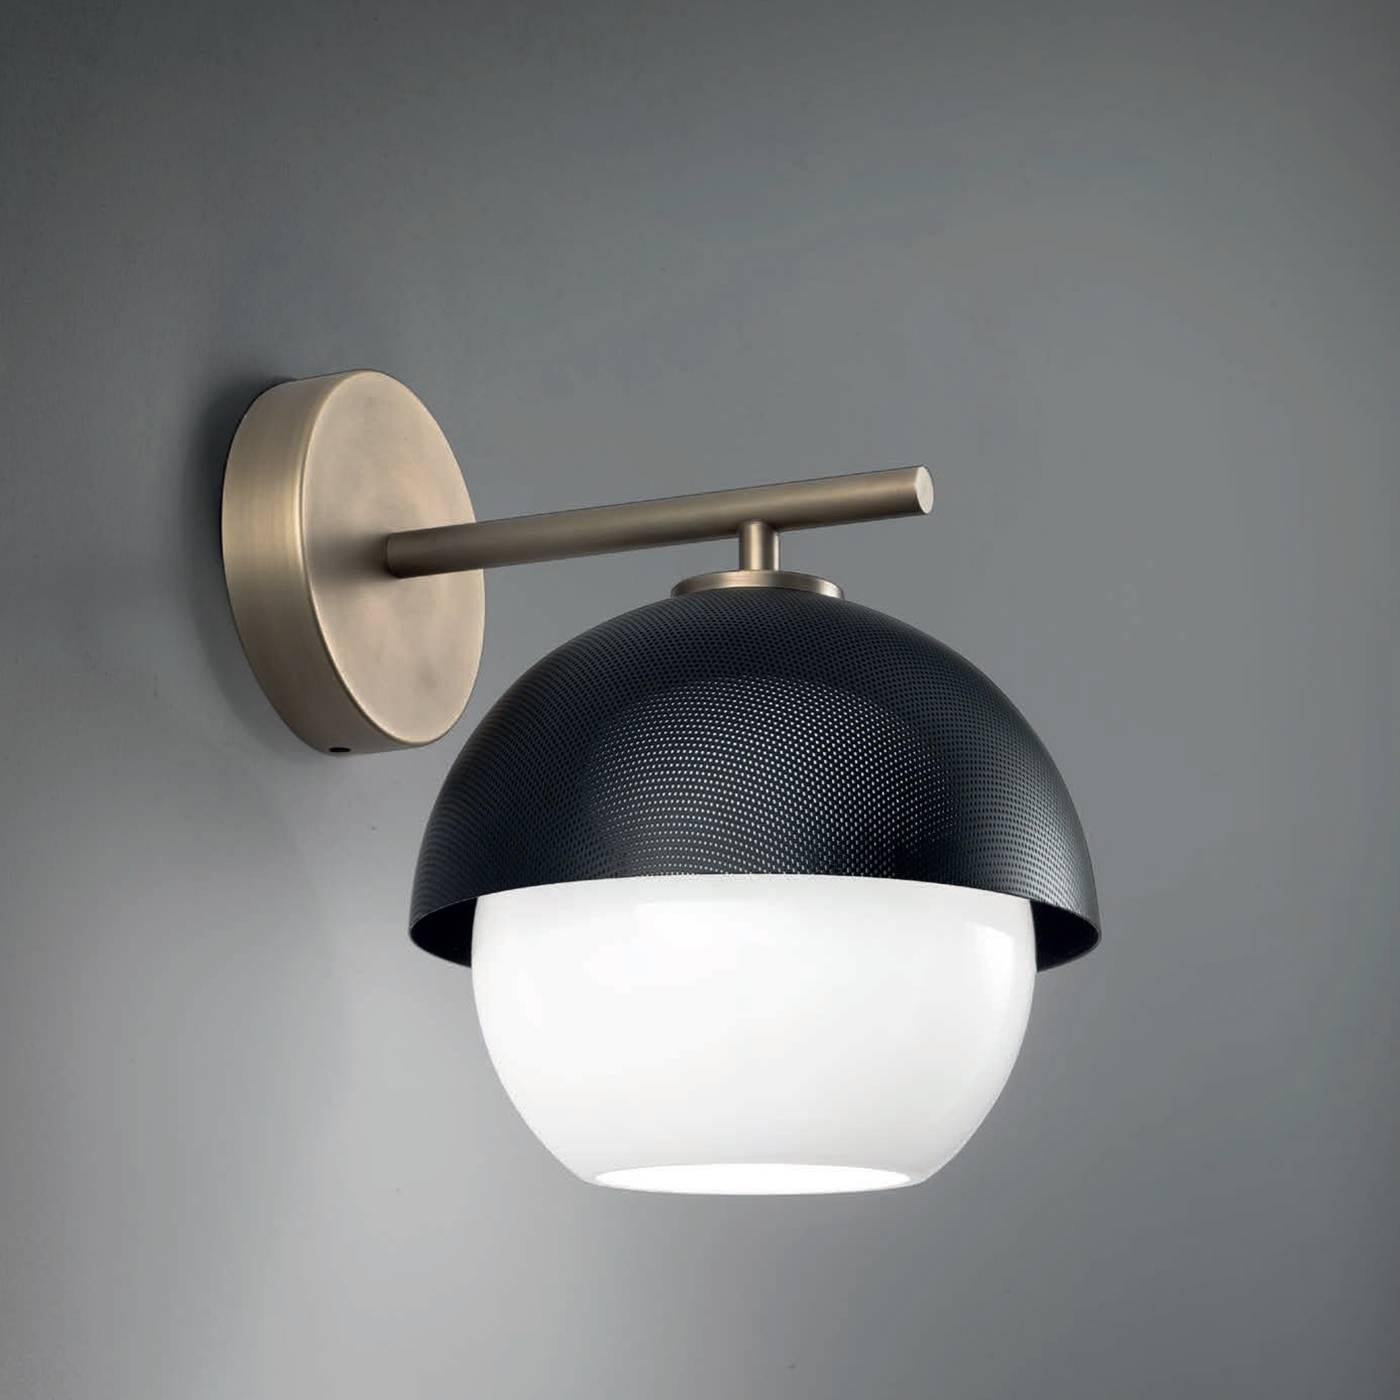 This sophisticated sconce has a brass structure in a light or dark burnished finish that supports a semi-spherical shade facing downwards and made in metal that can be either given a matte black or a matte golden finish, for a warmer final effect.